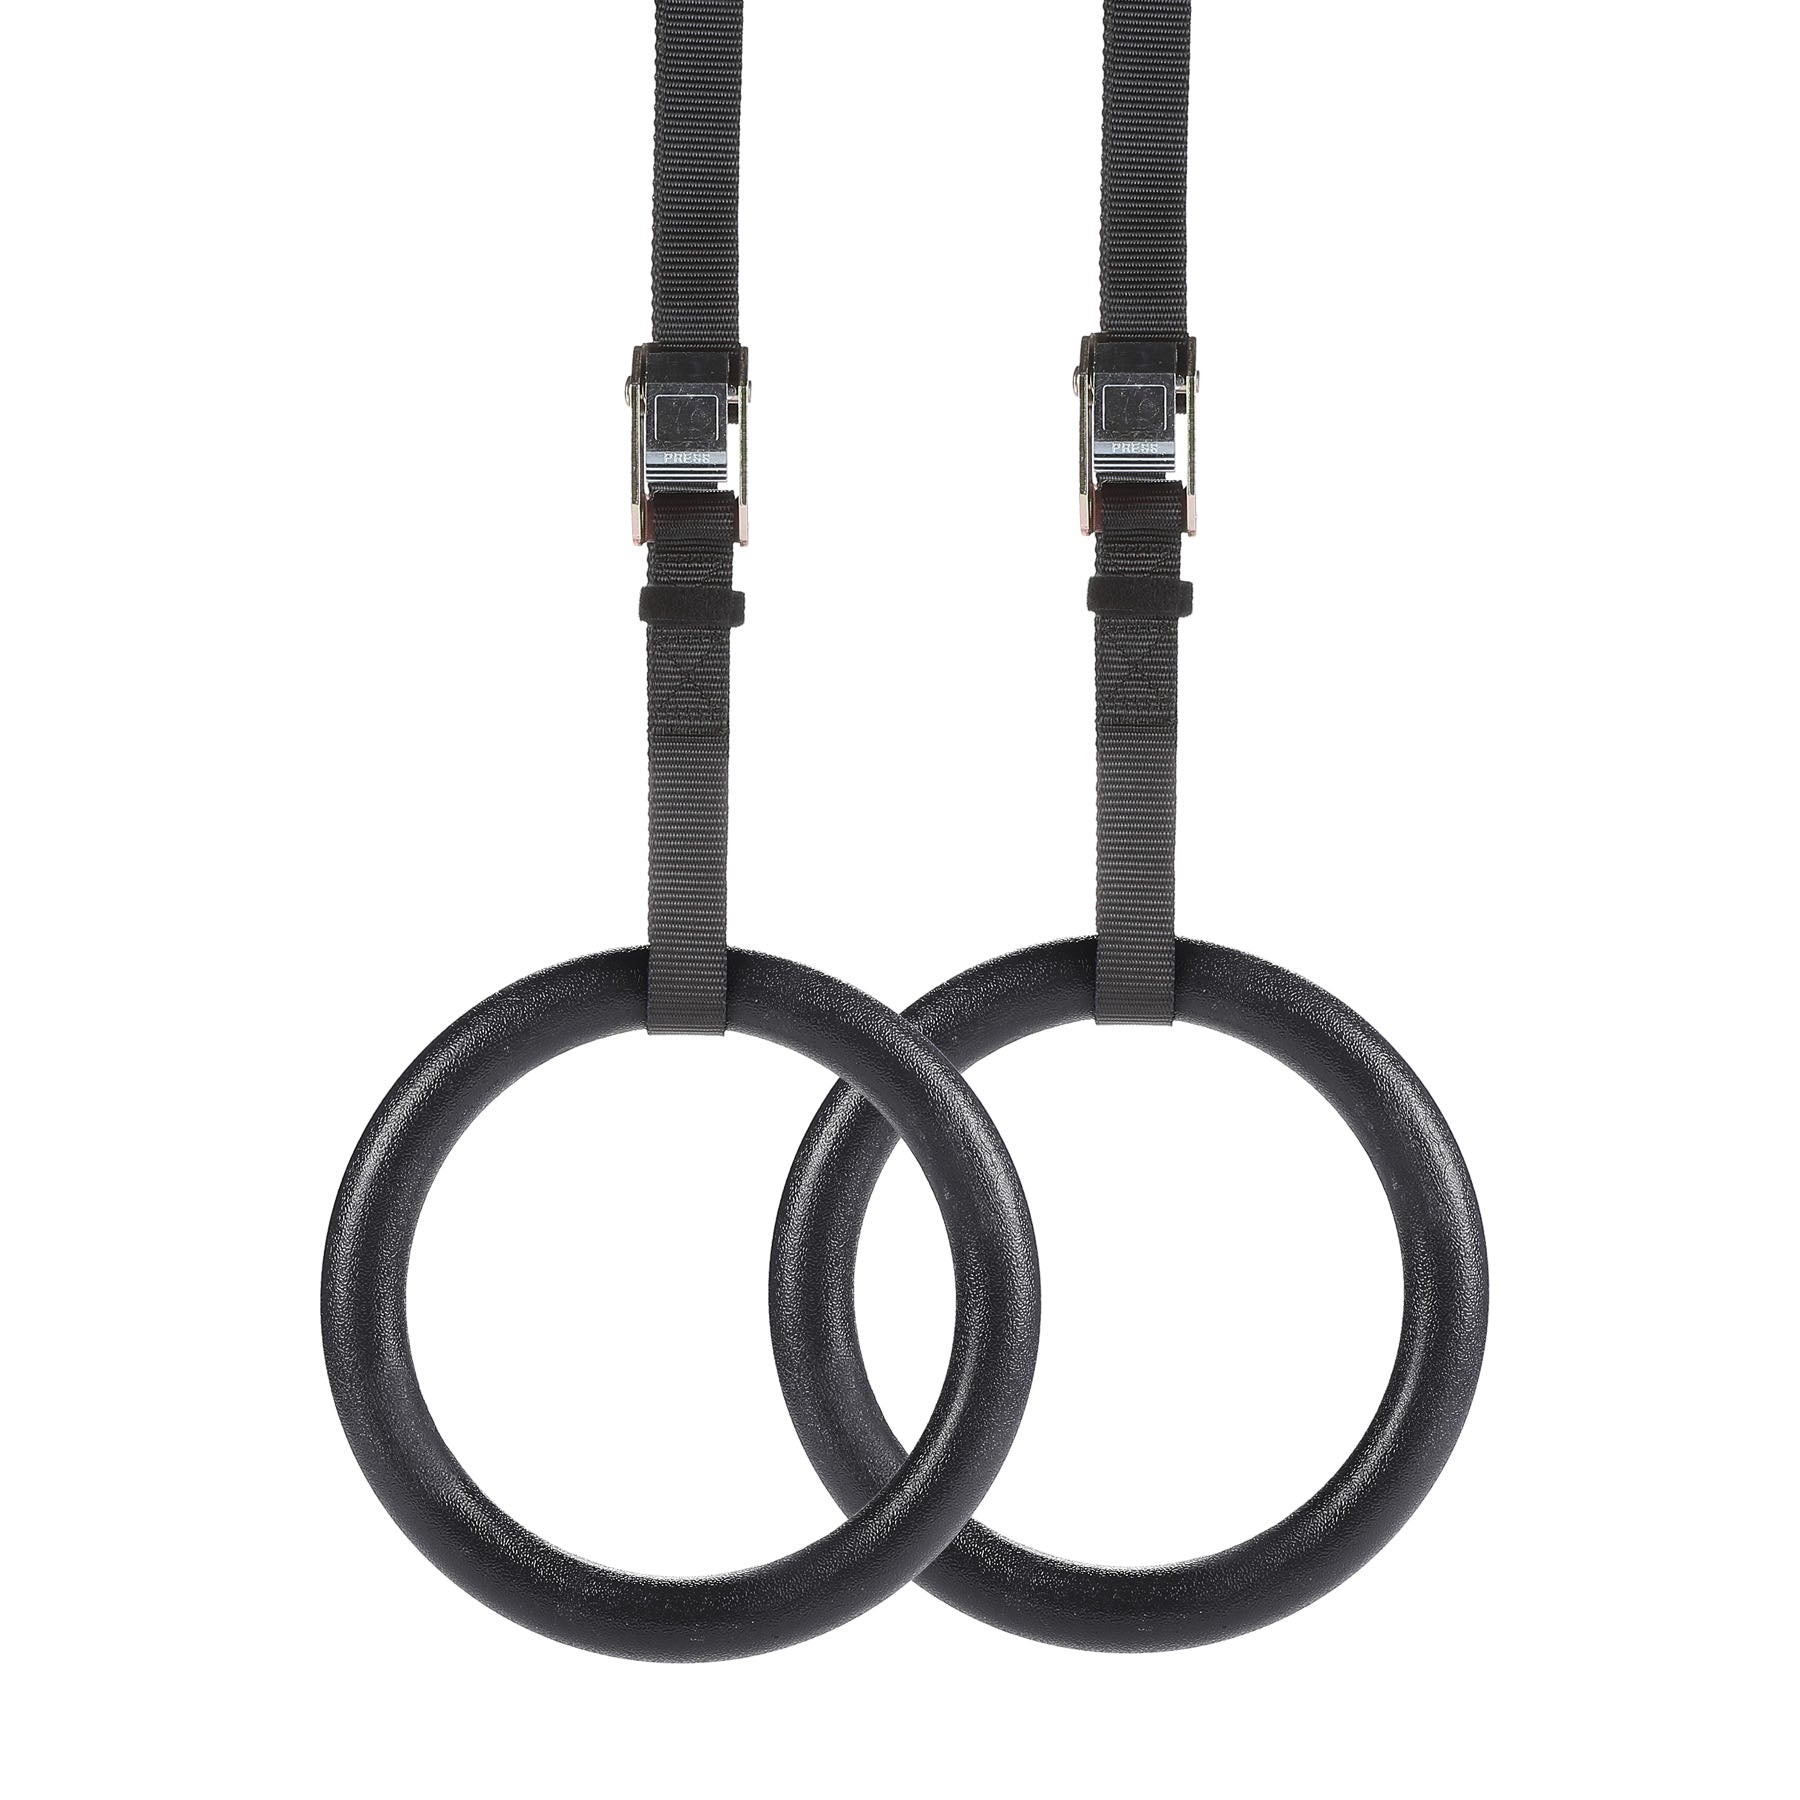 Olympic Gymnastic Rings with Adjustable Straps